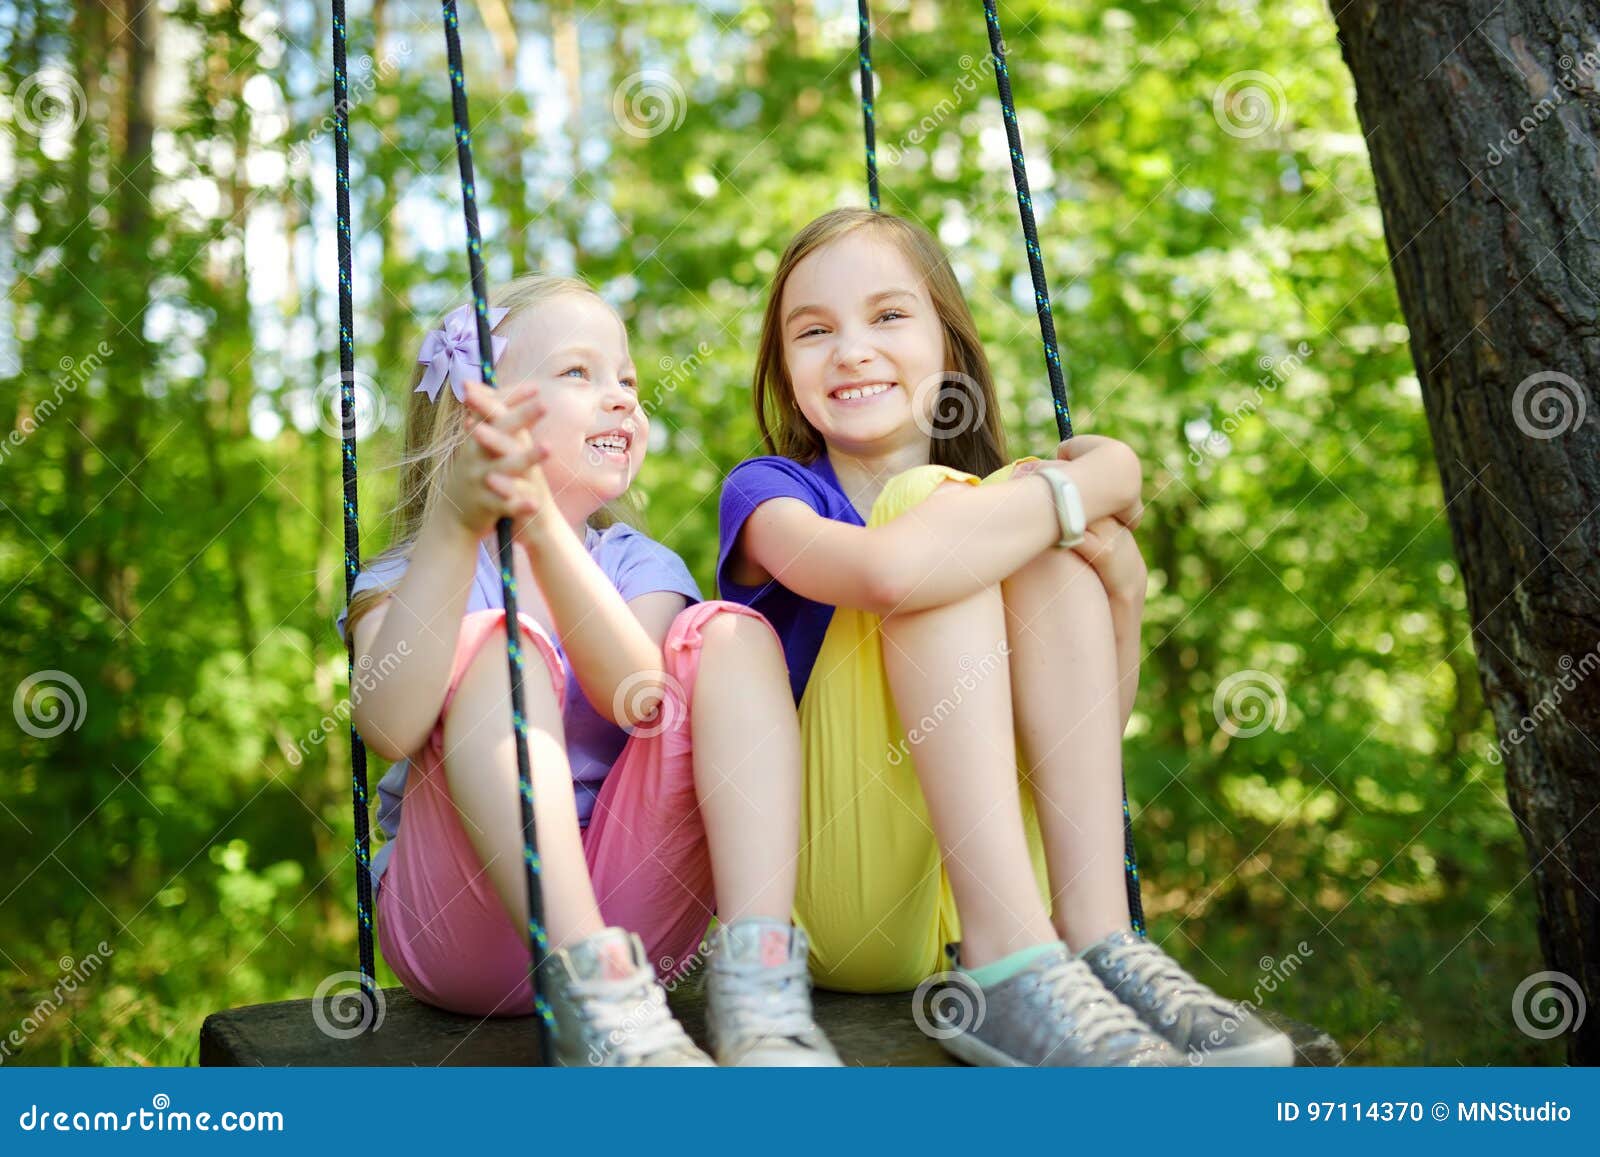 Two Cute Little Sisters Having Fun On A Swing Together In Beautiful